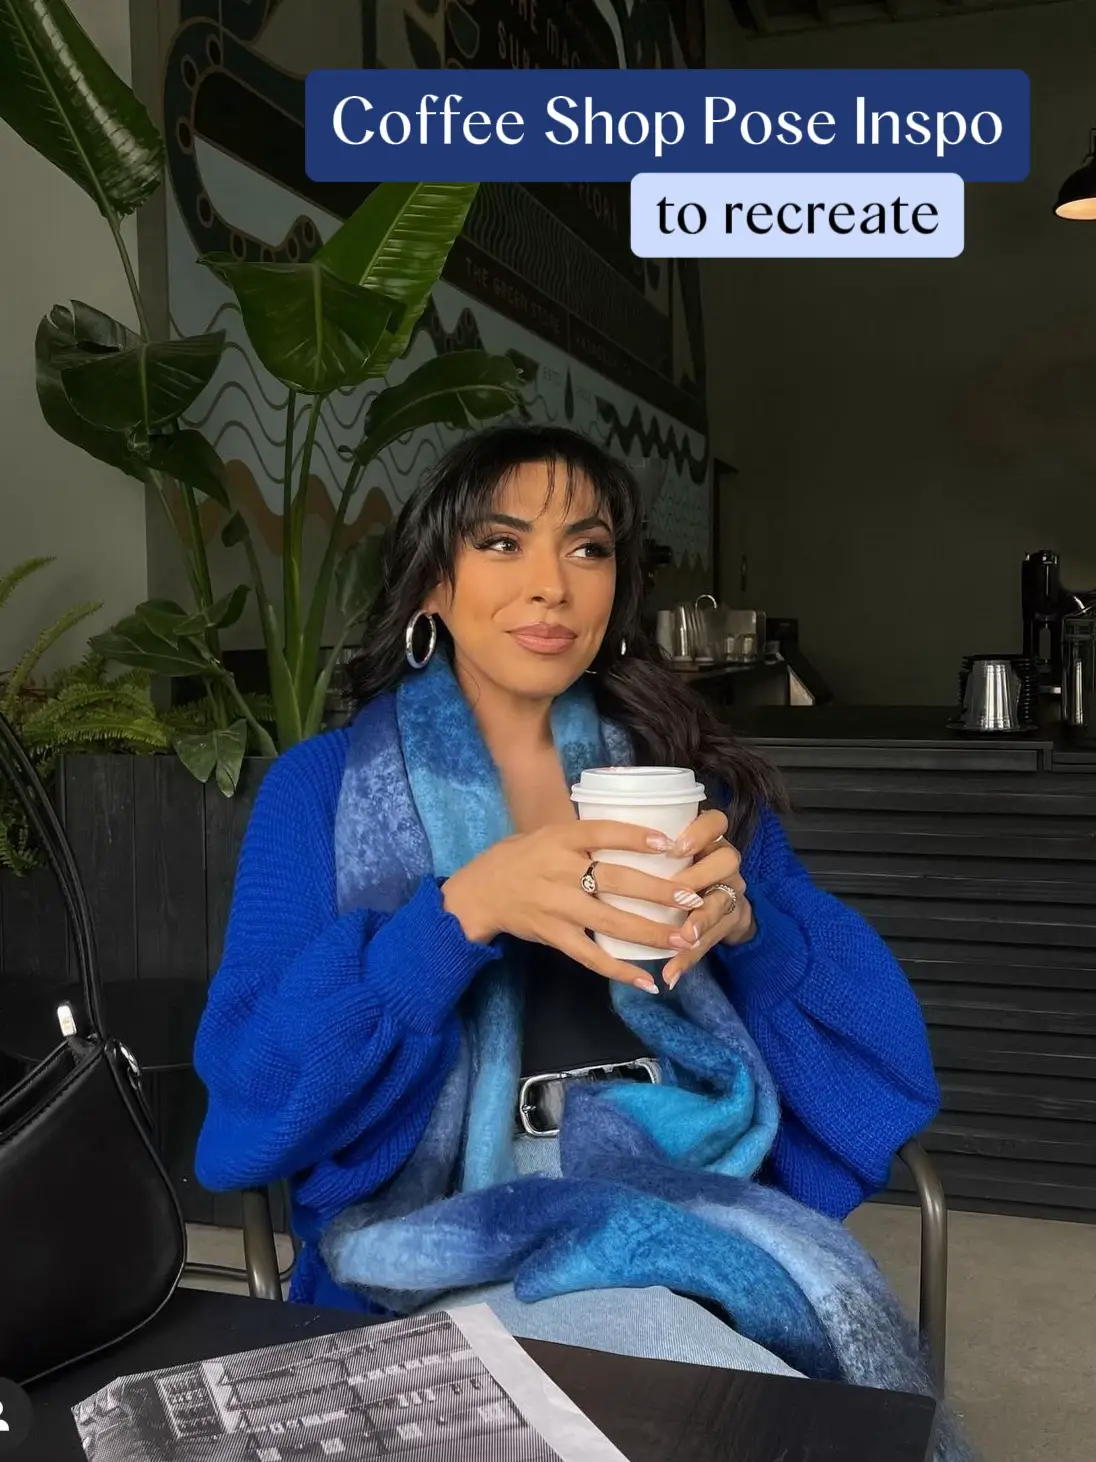  A woman in a blue sweater is sitting at a table with a cup of coffee.